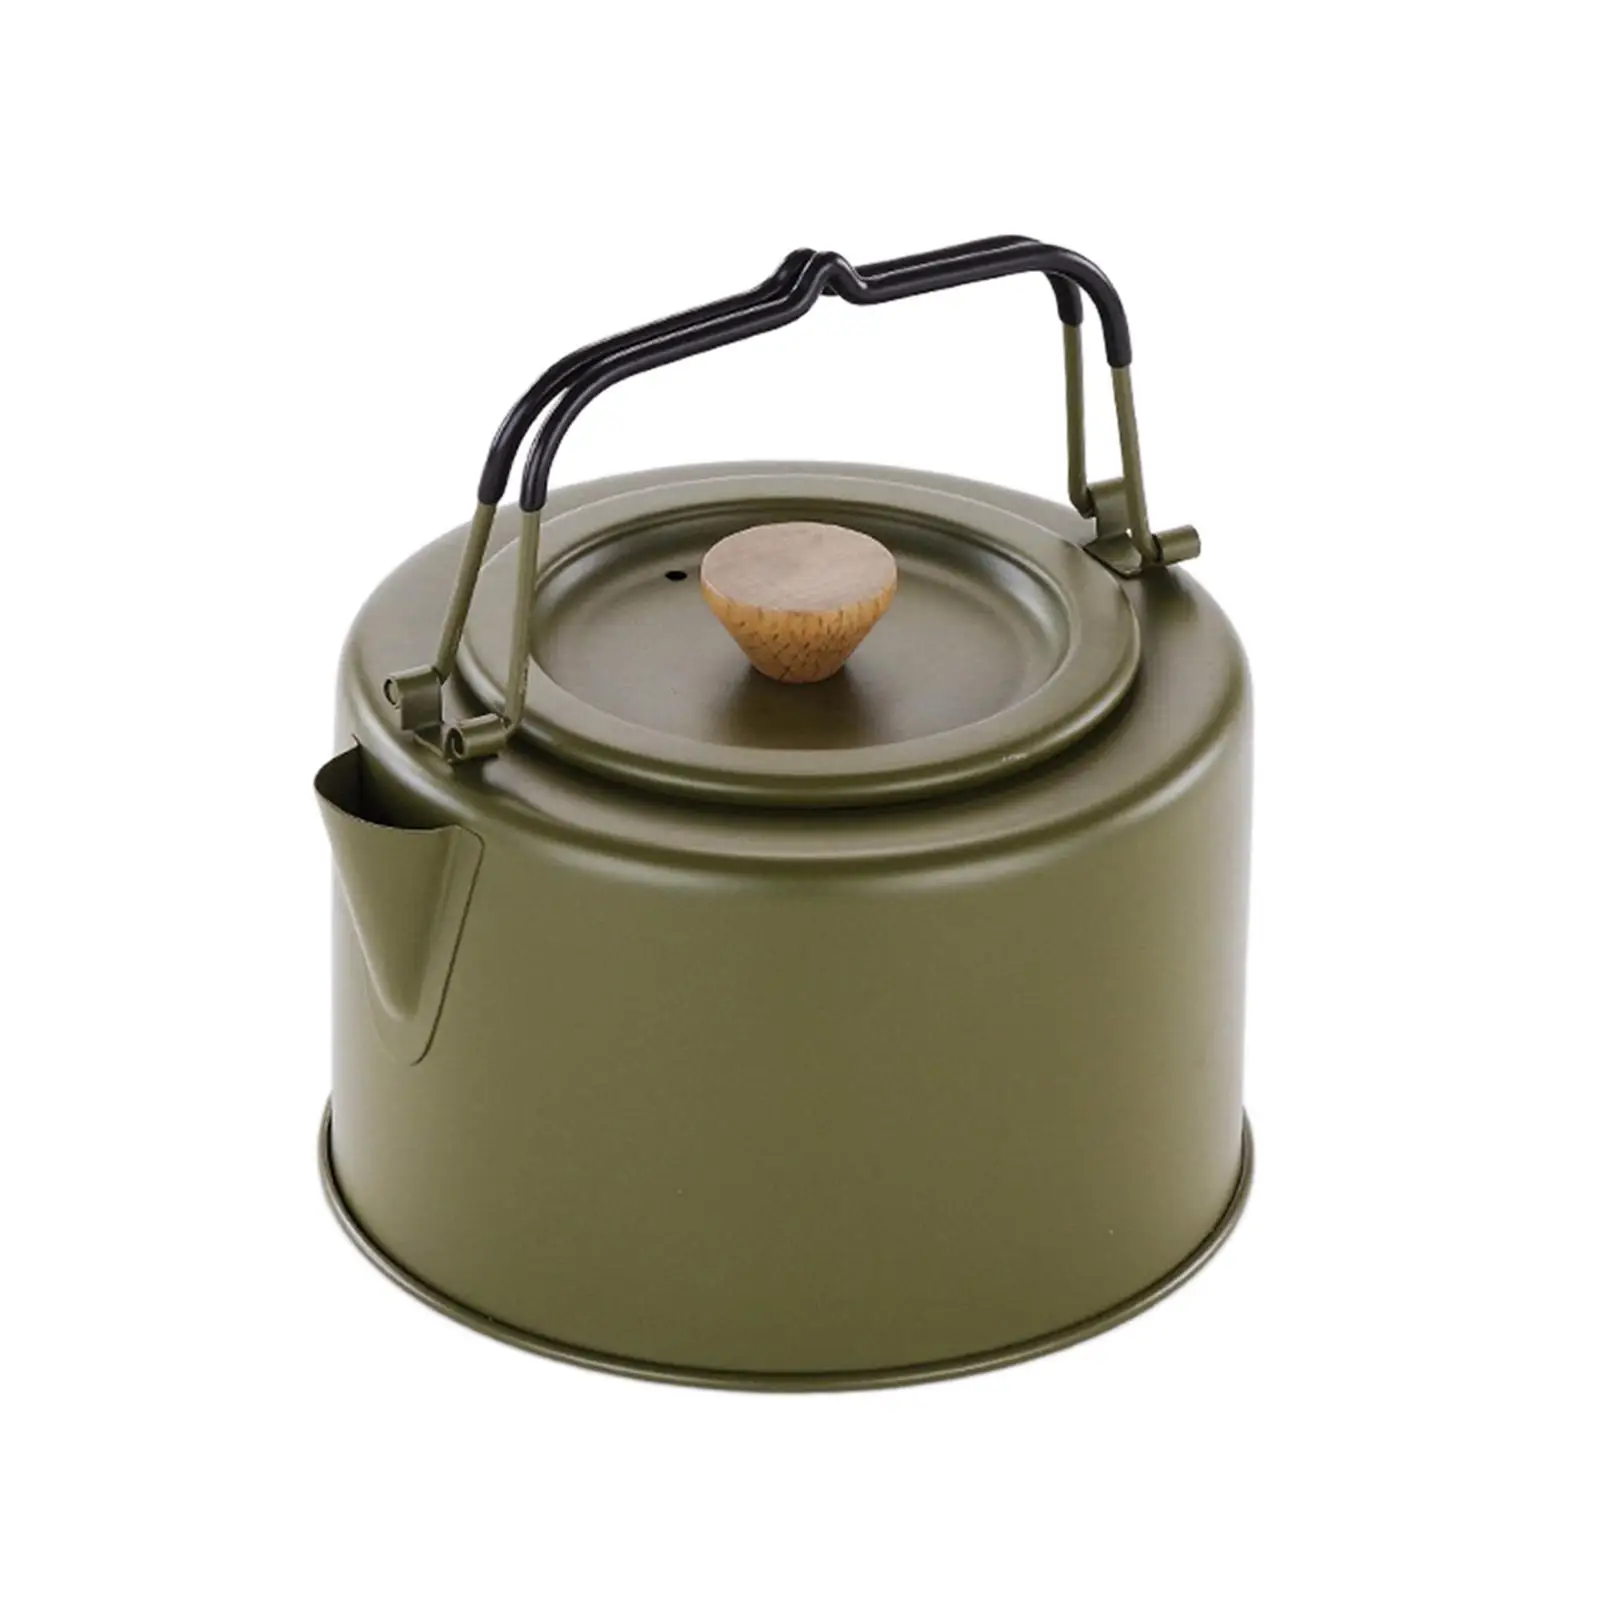 Camping Water Kettle Teapot Anti Scald and Lockable Handle Coffee Pot for Trekking Kitchen Picnic Backpacking Mountaineering